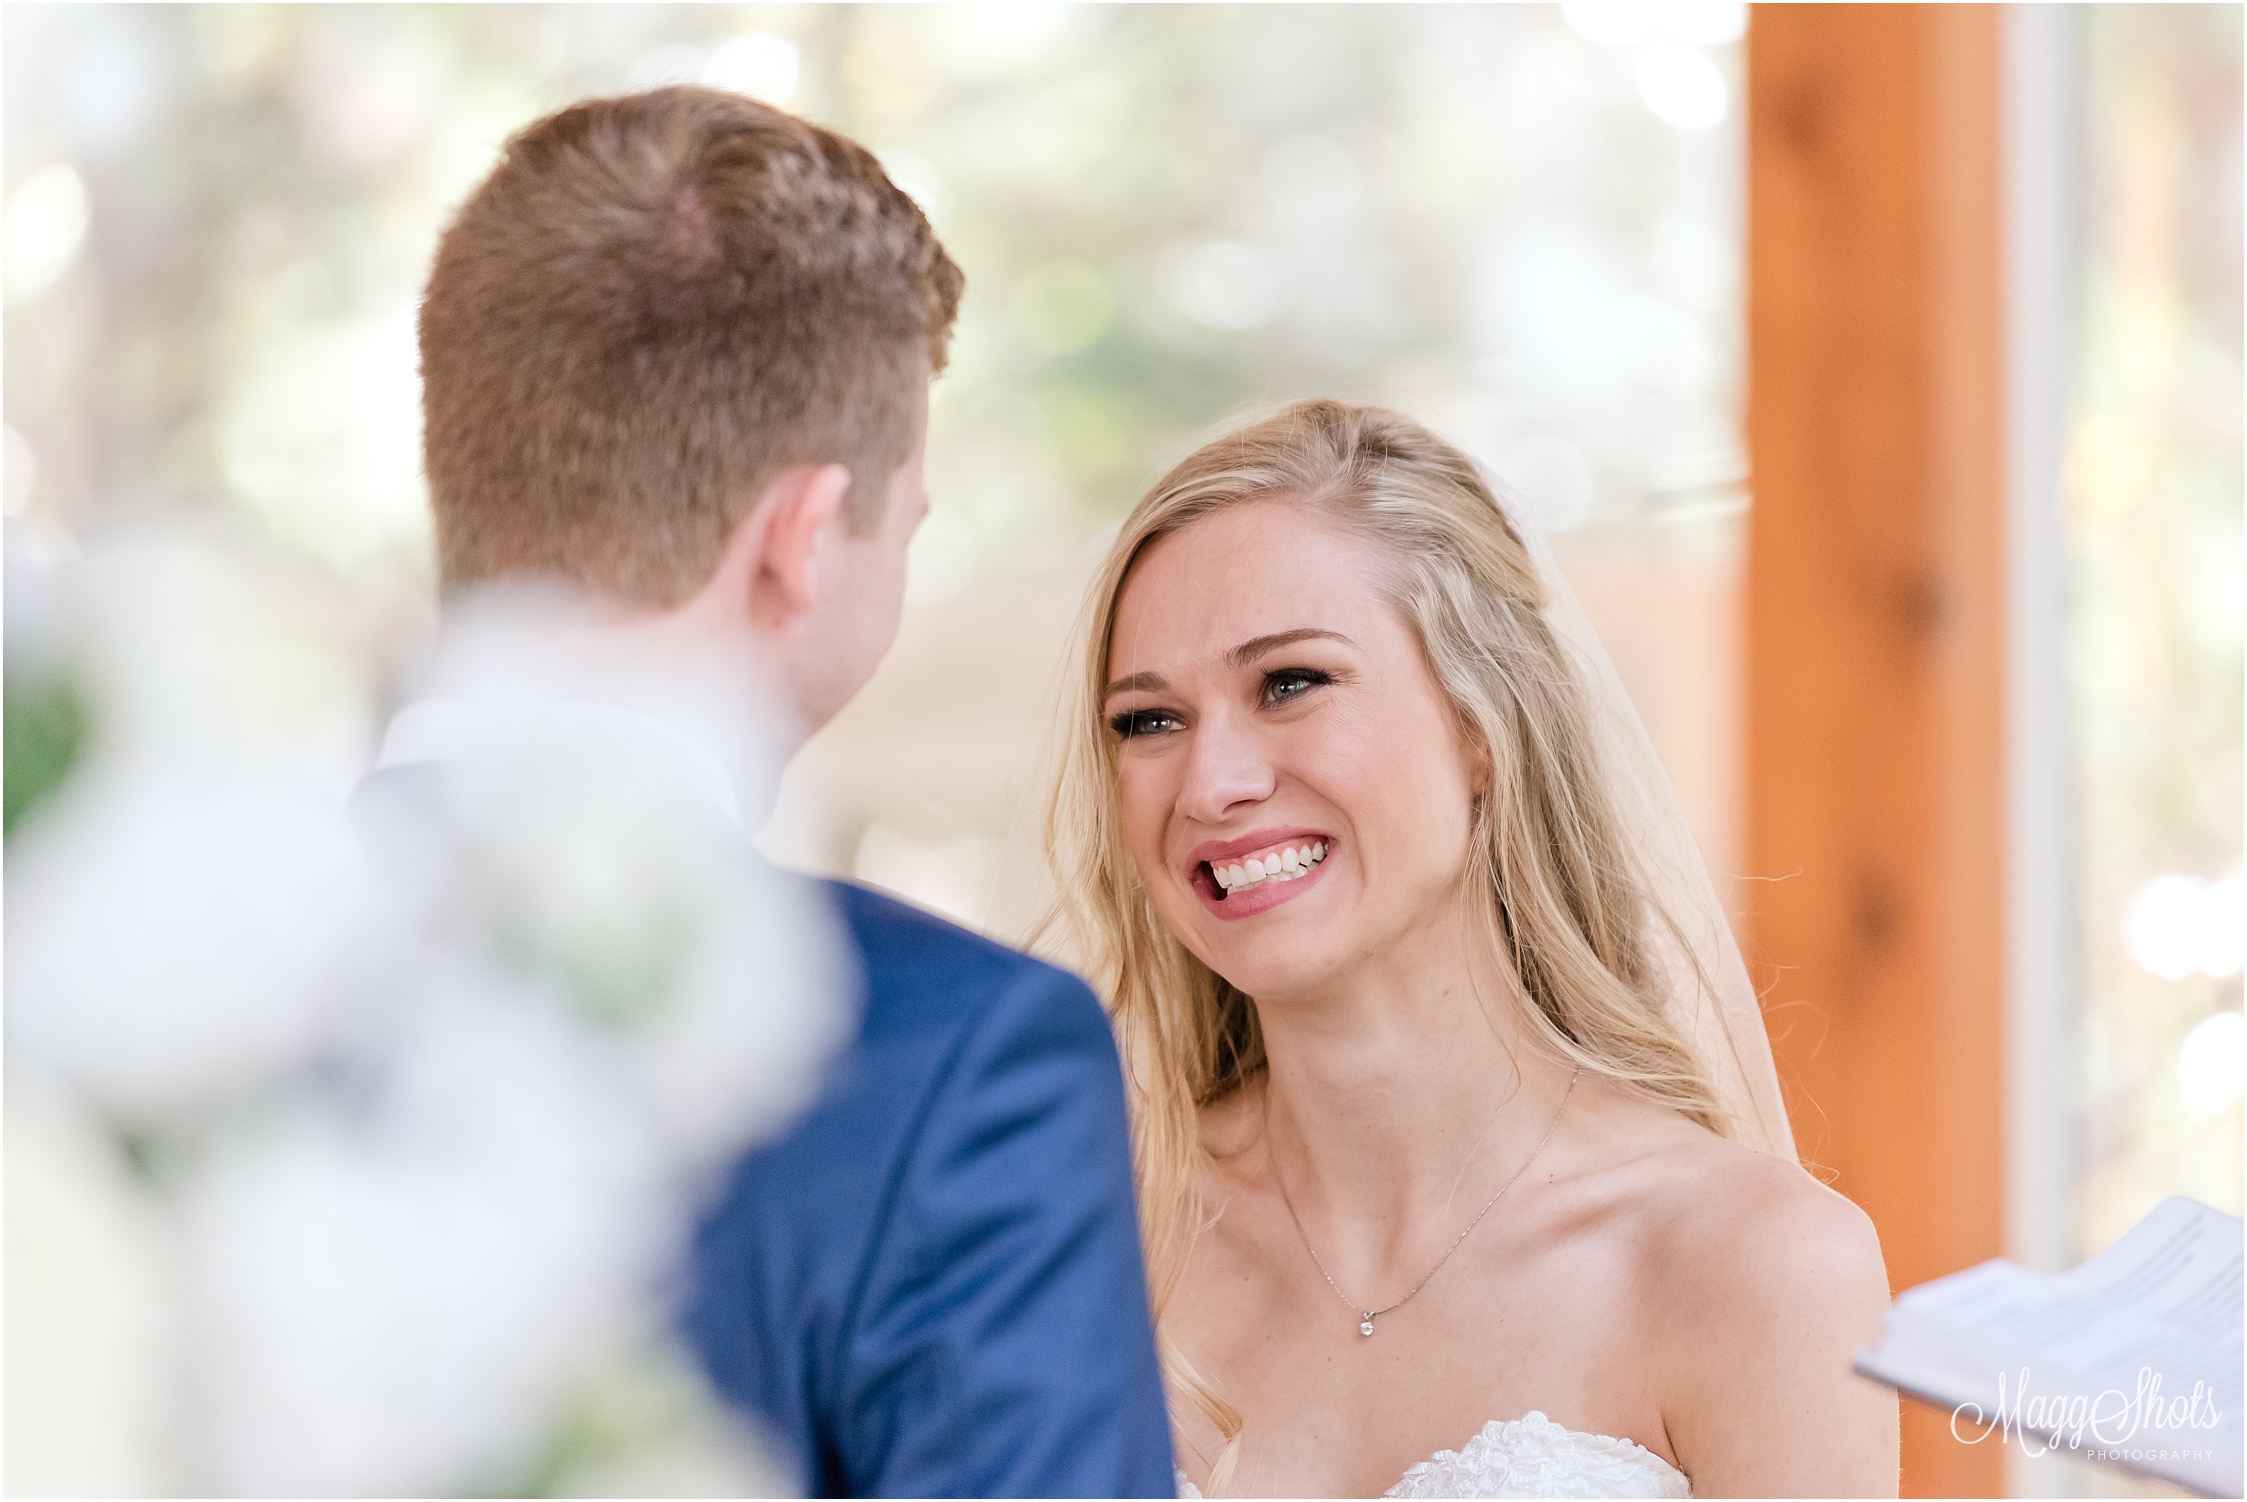 Bridal, Portraits, Bouquet, Ring, Bling, Professional Photography, Professional Photographer, Wedding Photographer, Destination Wedding Photographer, Love, Bride and Groom, Wedding Dress, Ashton Gardens, MaggShots Photography, MaggShots, Happy, Family, Kiss, Smile